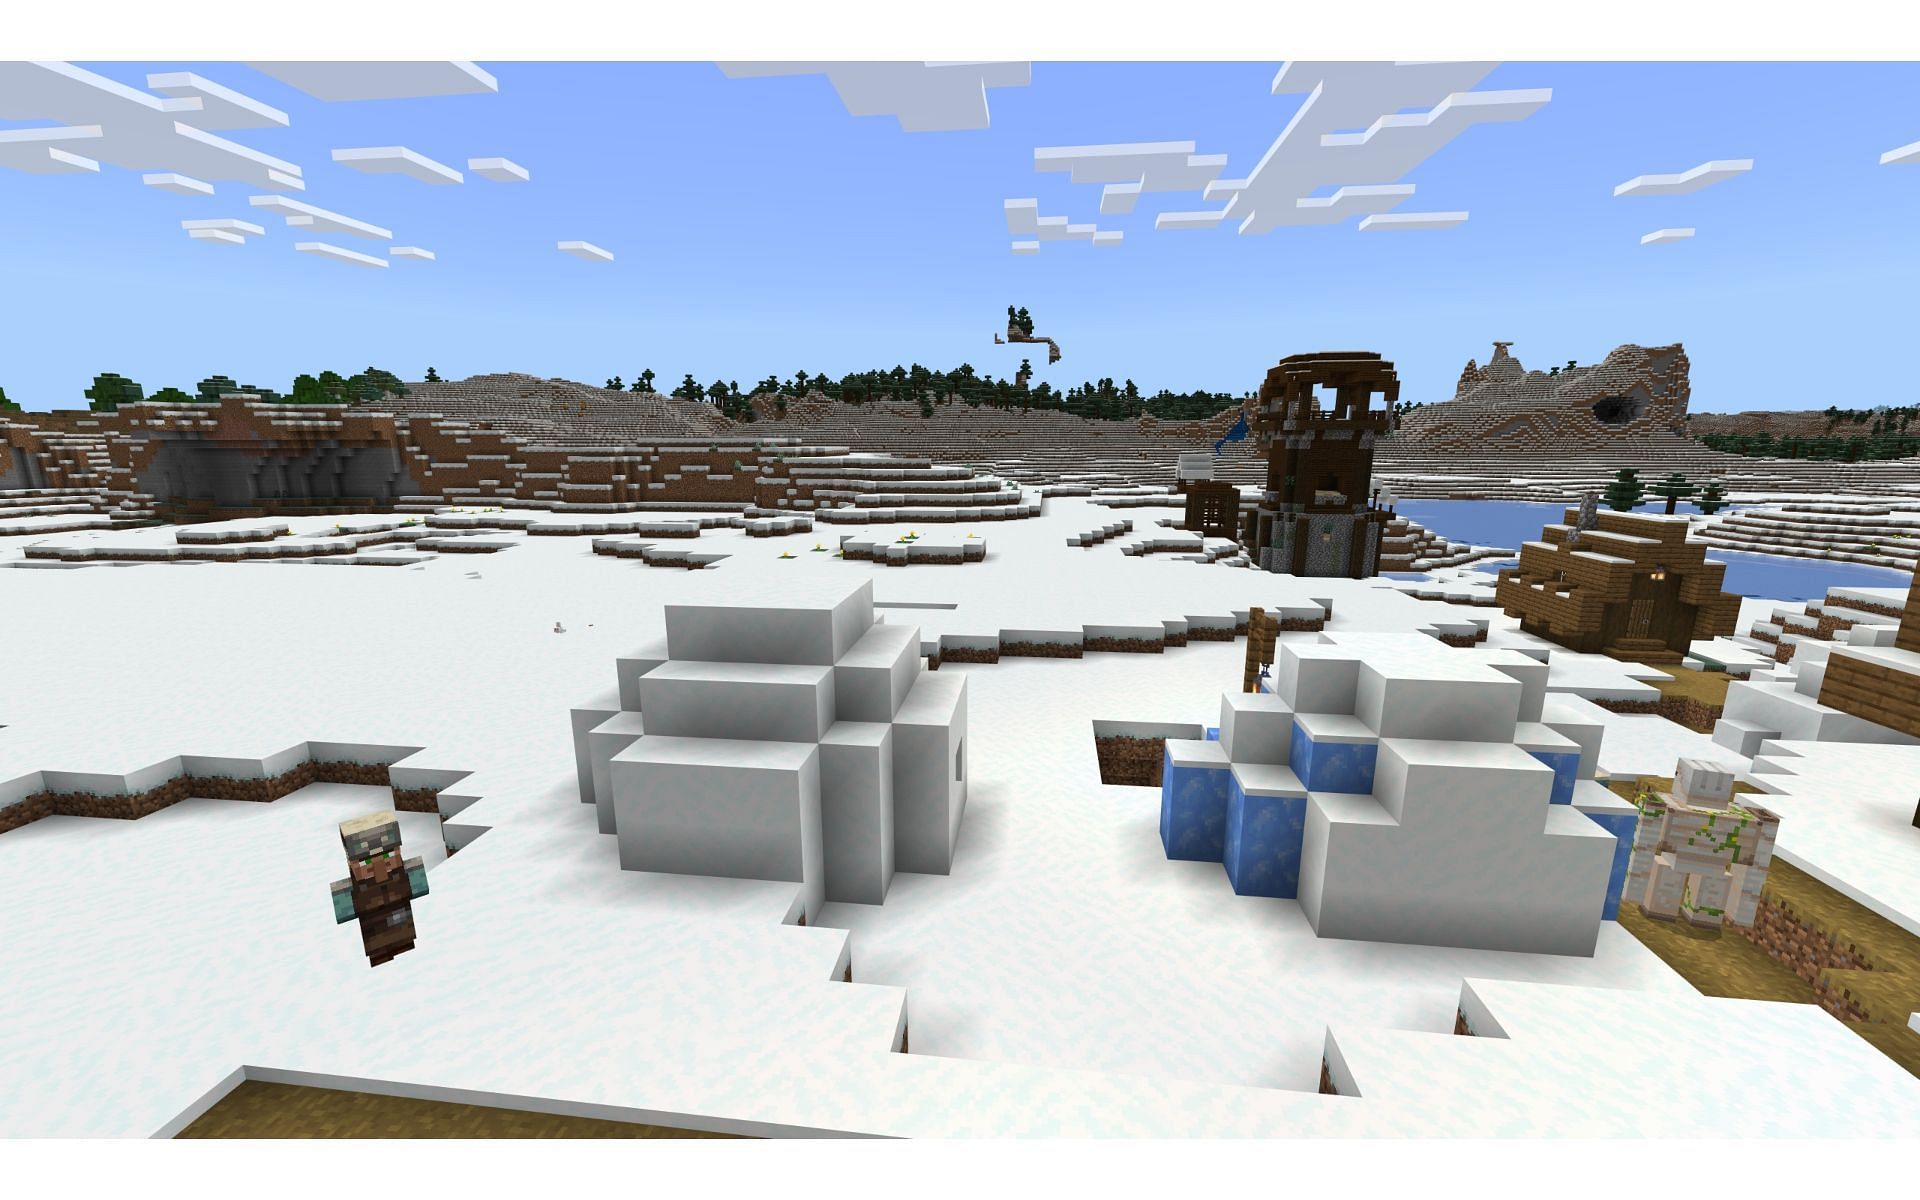 One of these igloos is hiding a secret (Image via Mojang)